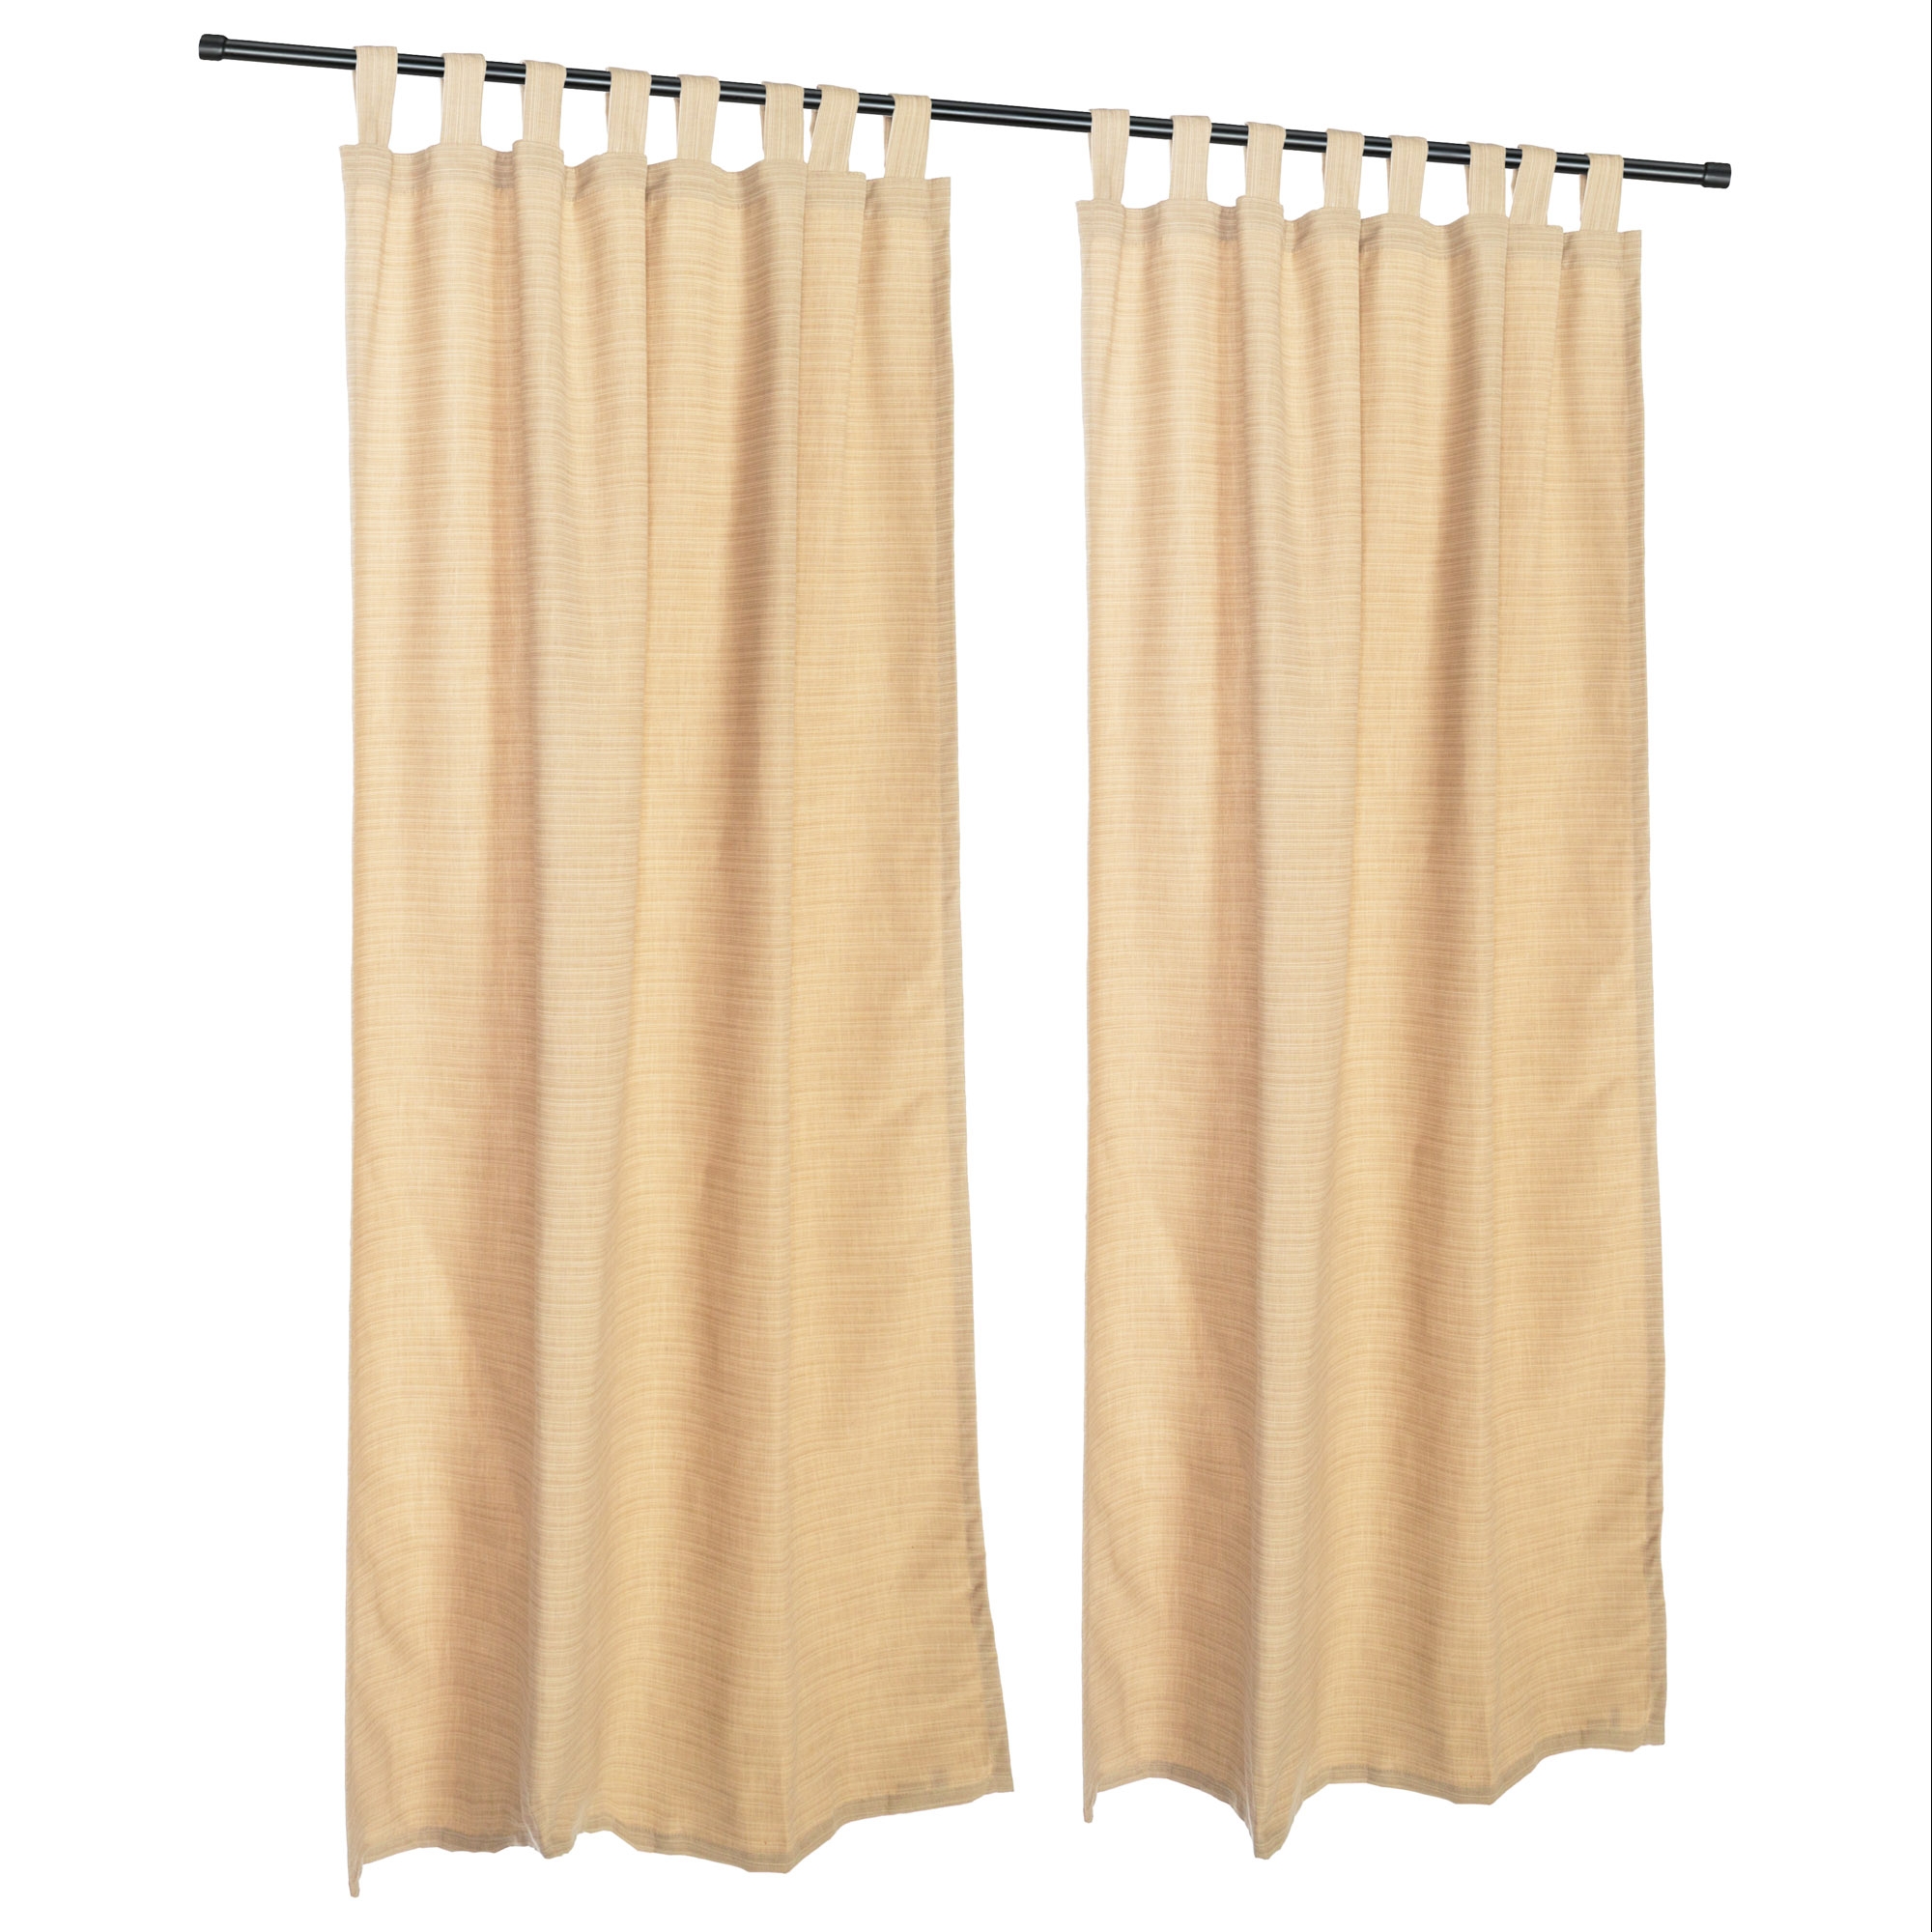 outdoor curtains bamboo photo - 9